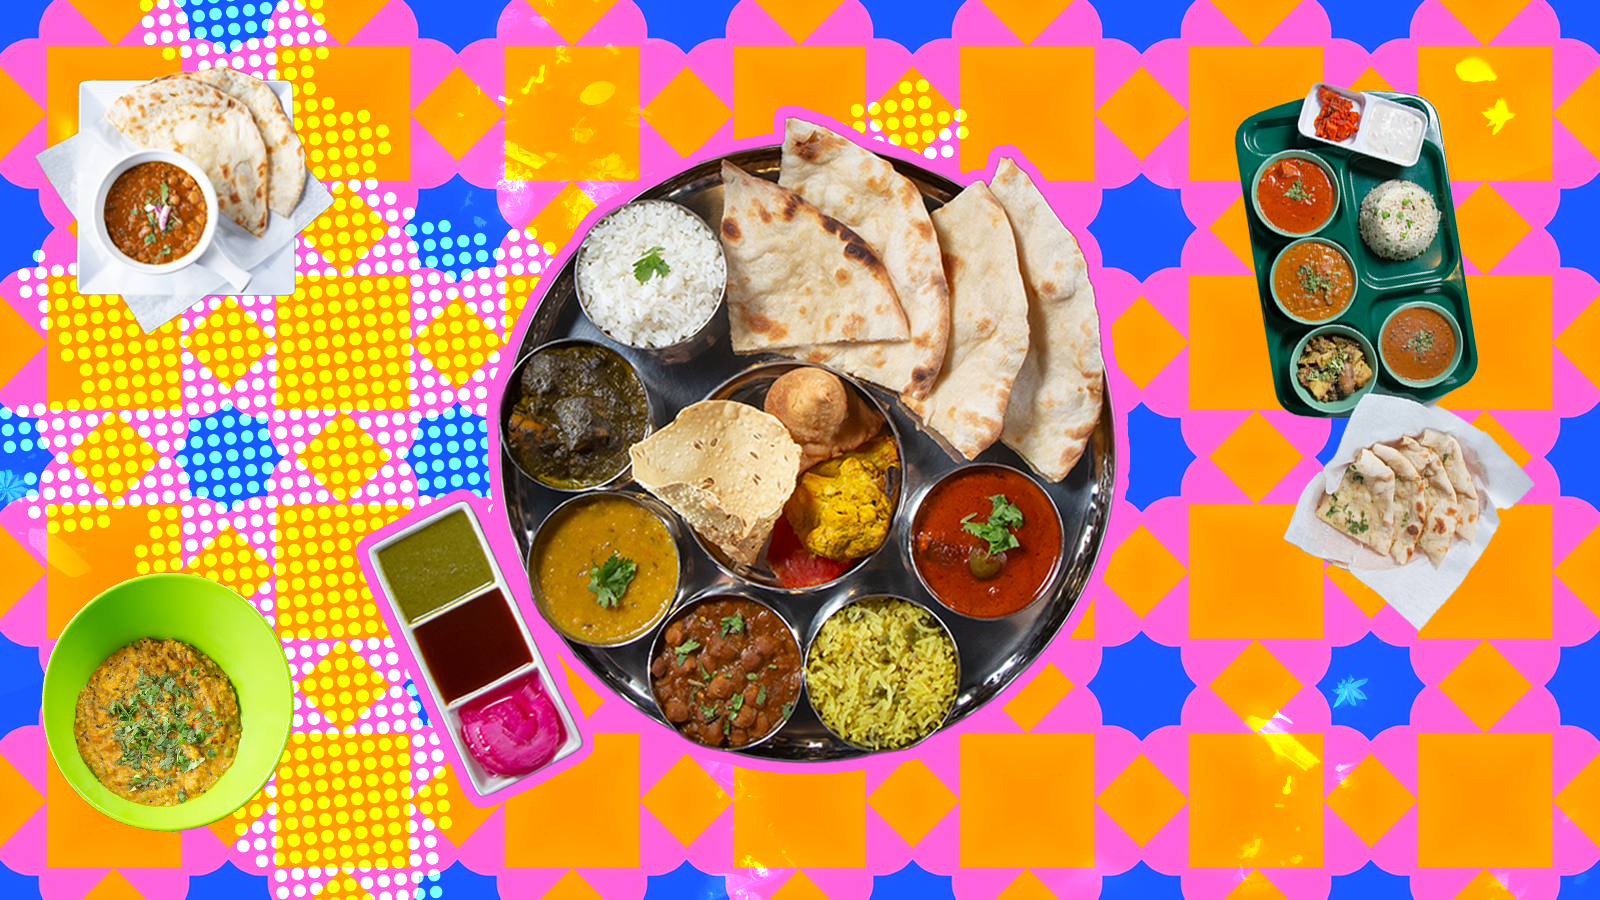 A colorful illustration of Indian foods.